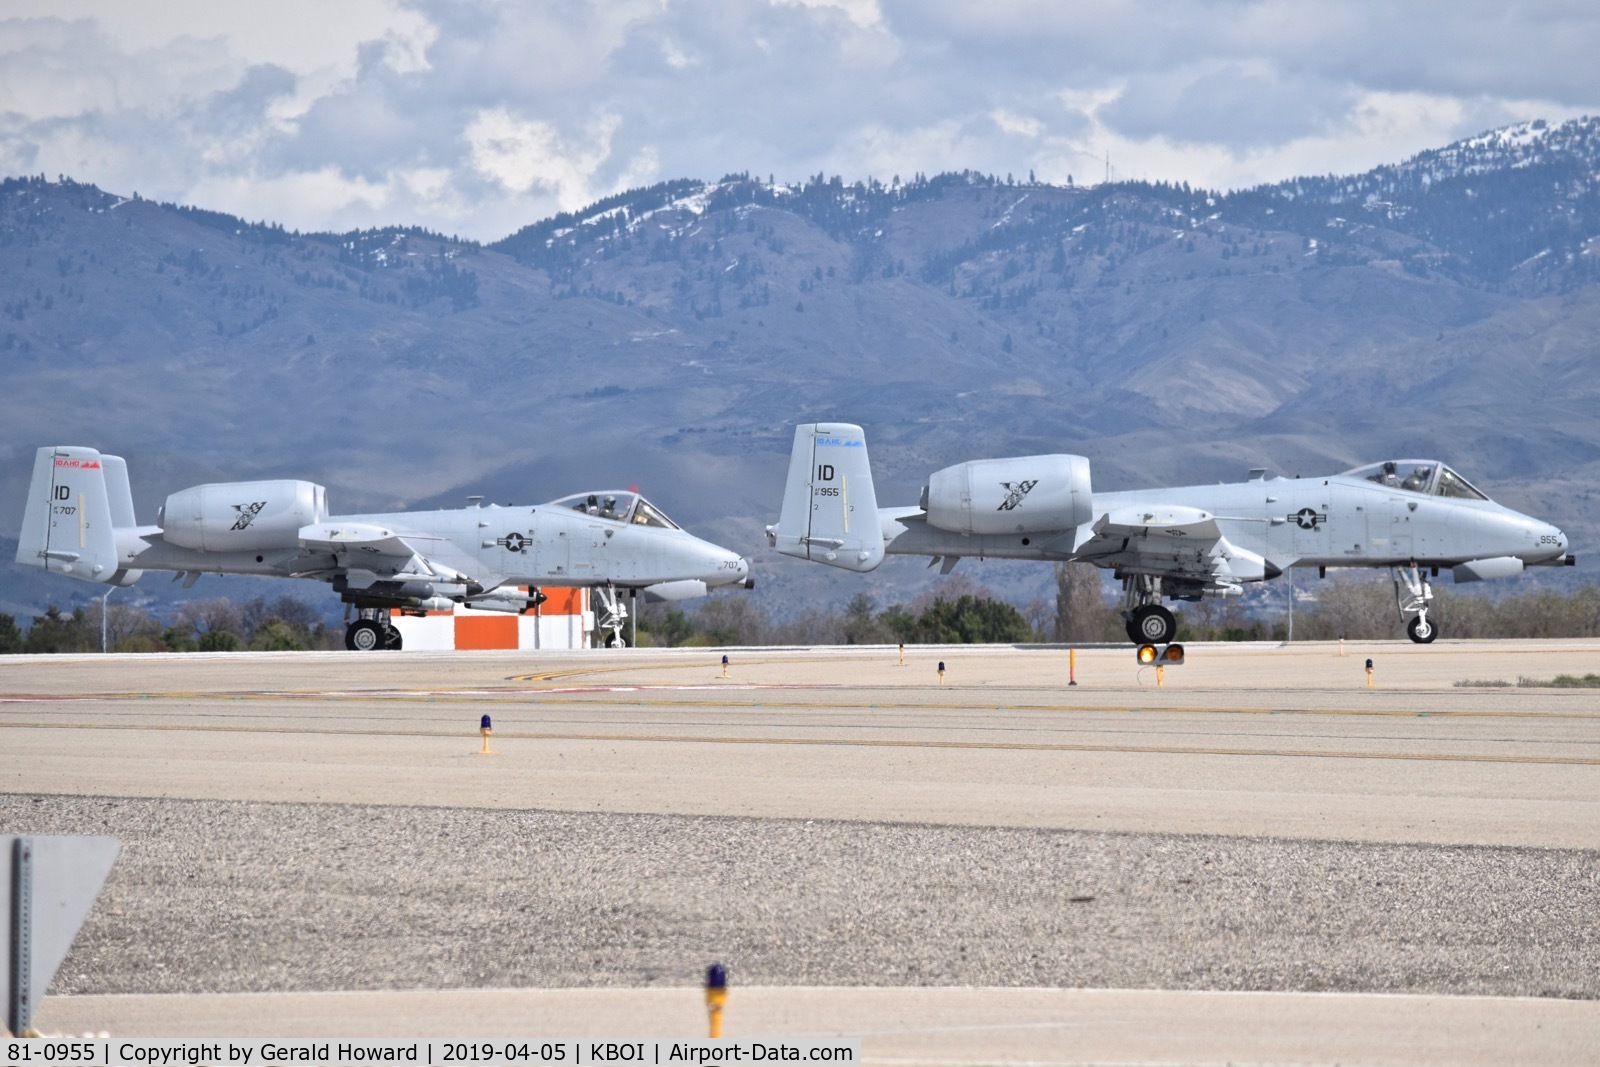 81-0955, 1981 Fairchild Republic A-10C Thunderbolt II C/N A10-0650, On RWY 10R along with 78-0707 awaiting take off clearance.  190th Fighter Sq., 124th Fighter Wing, Idaho ANG.